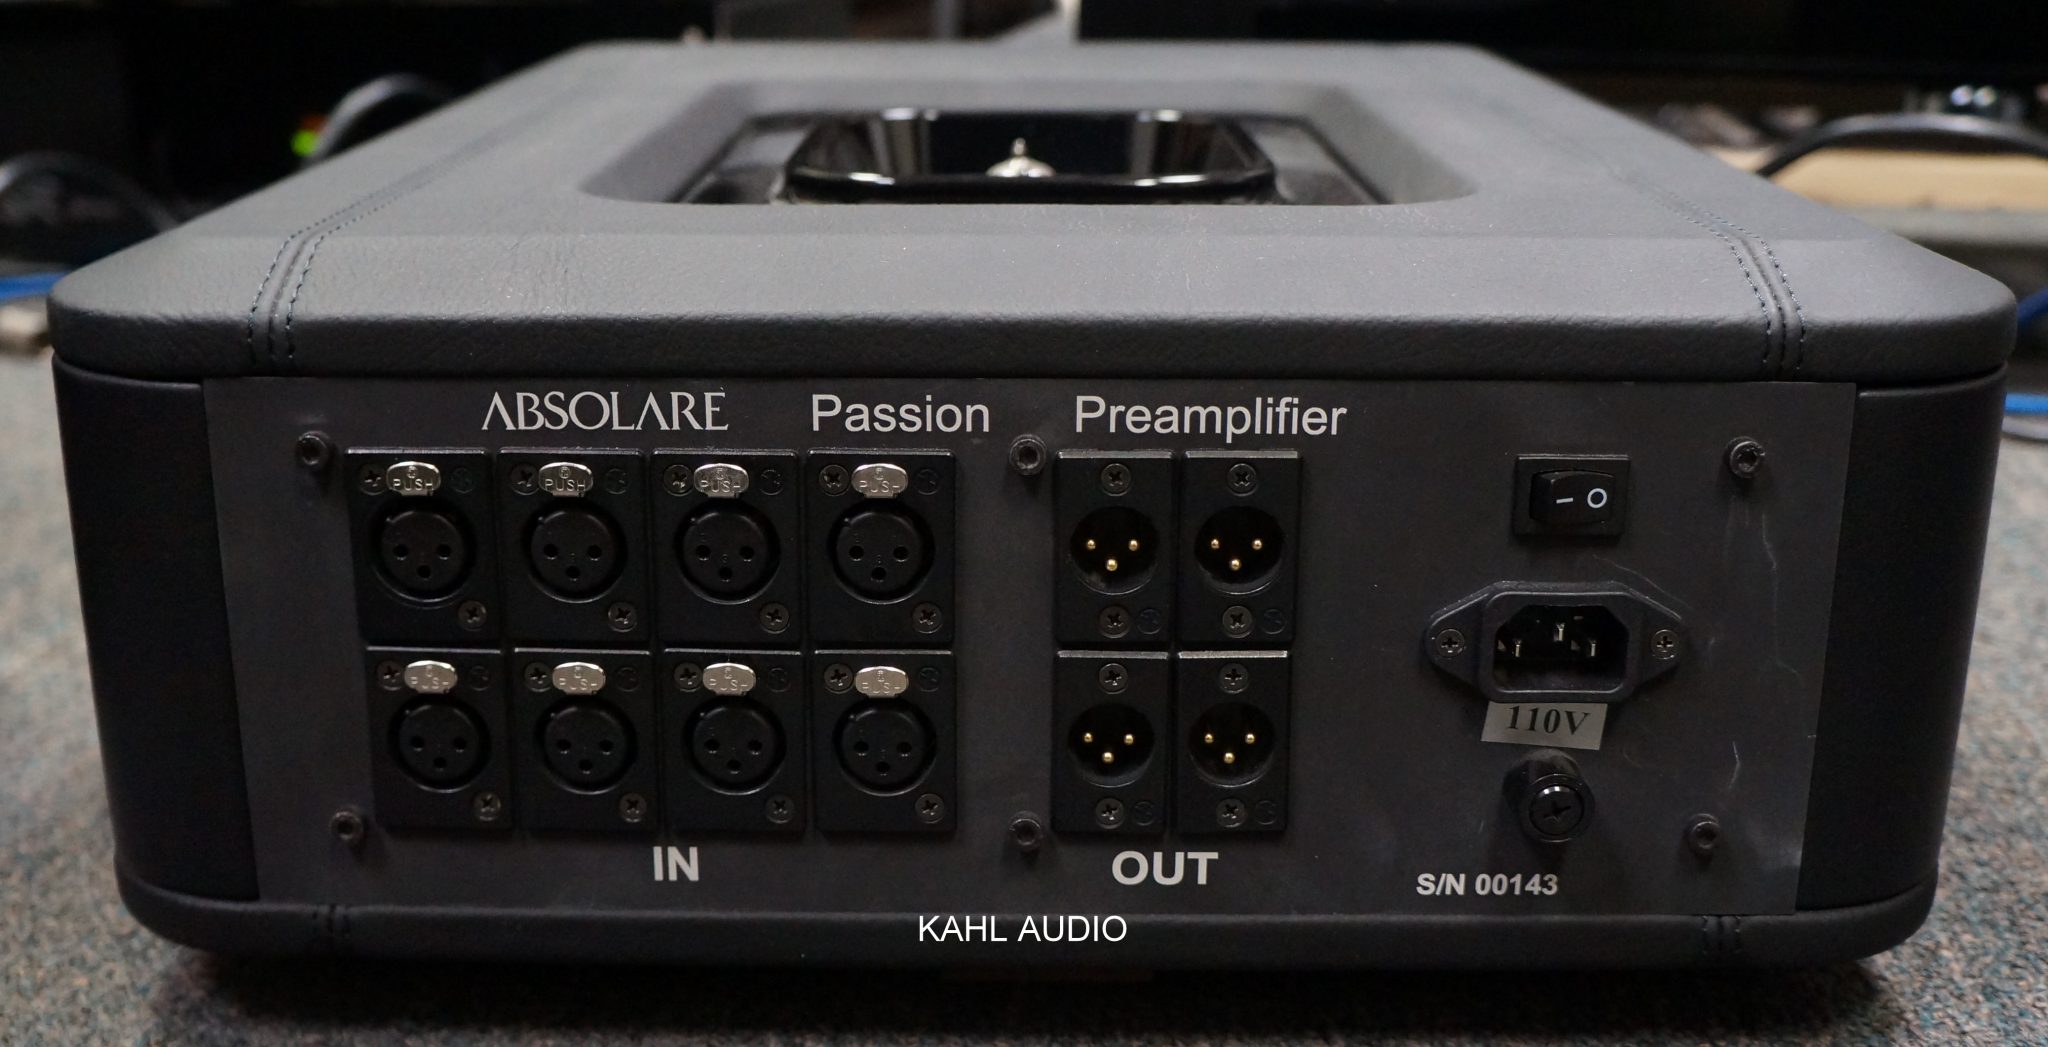 Absolare Passion Altius Balanced preamp. Absolute Sound